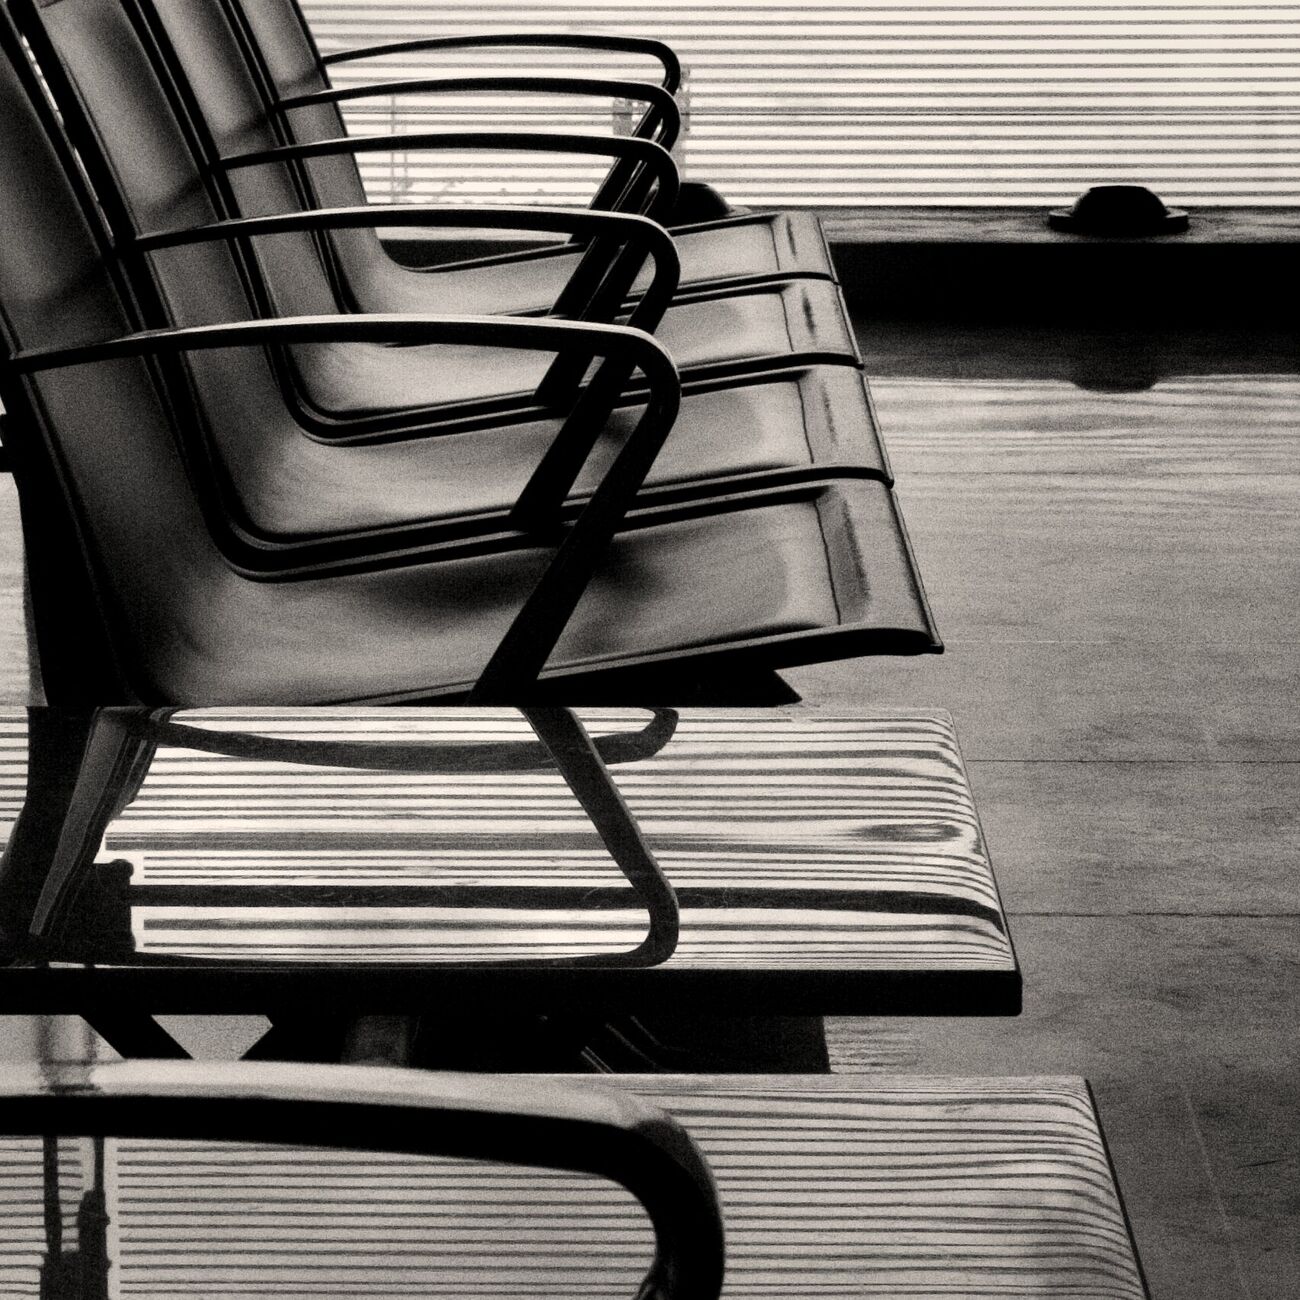 Waiting For The Next Flight, Bordeaux International Airport, France. April 2003. Ref-734 - Denis Olivier Photography